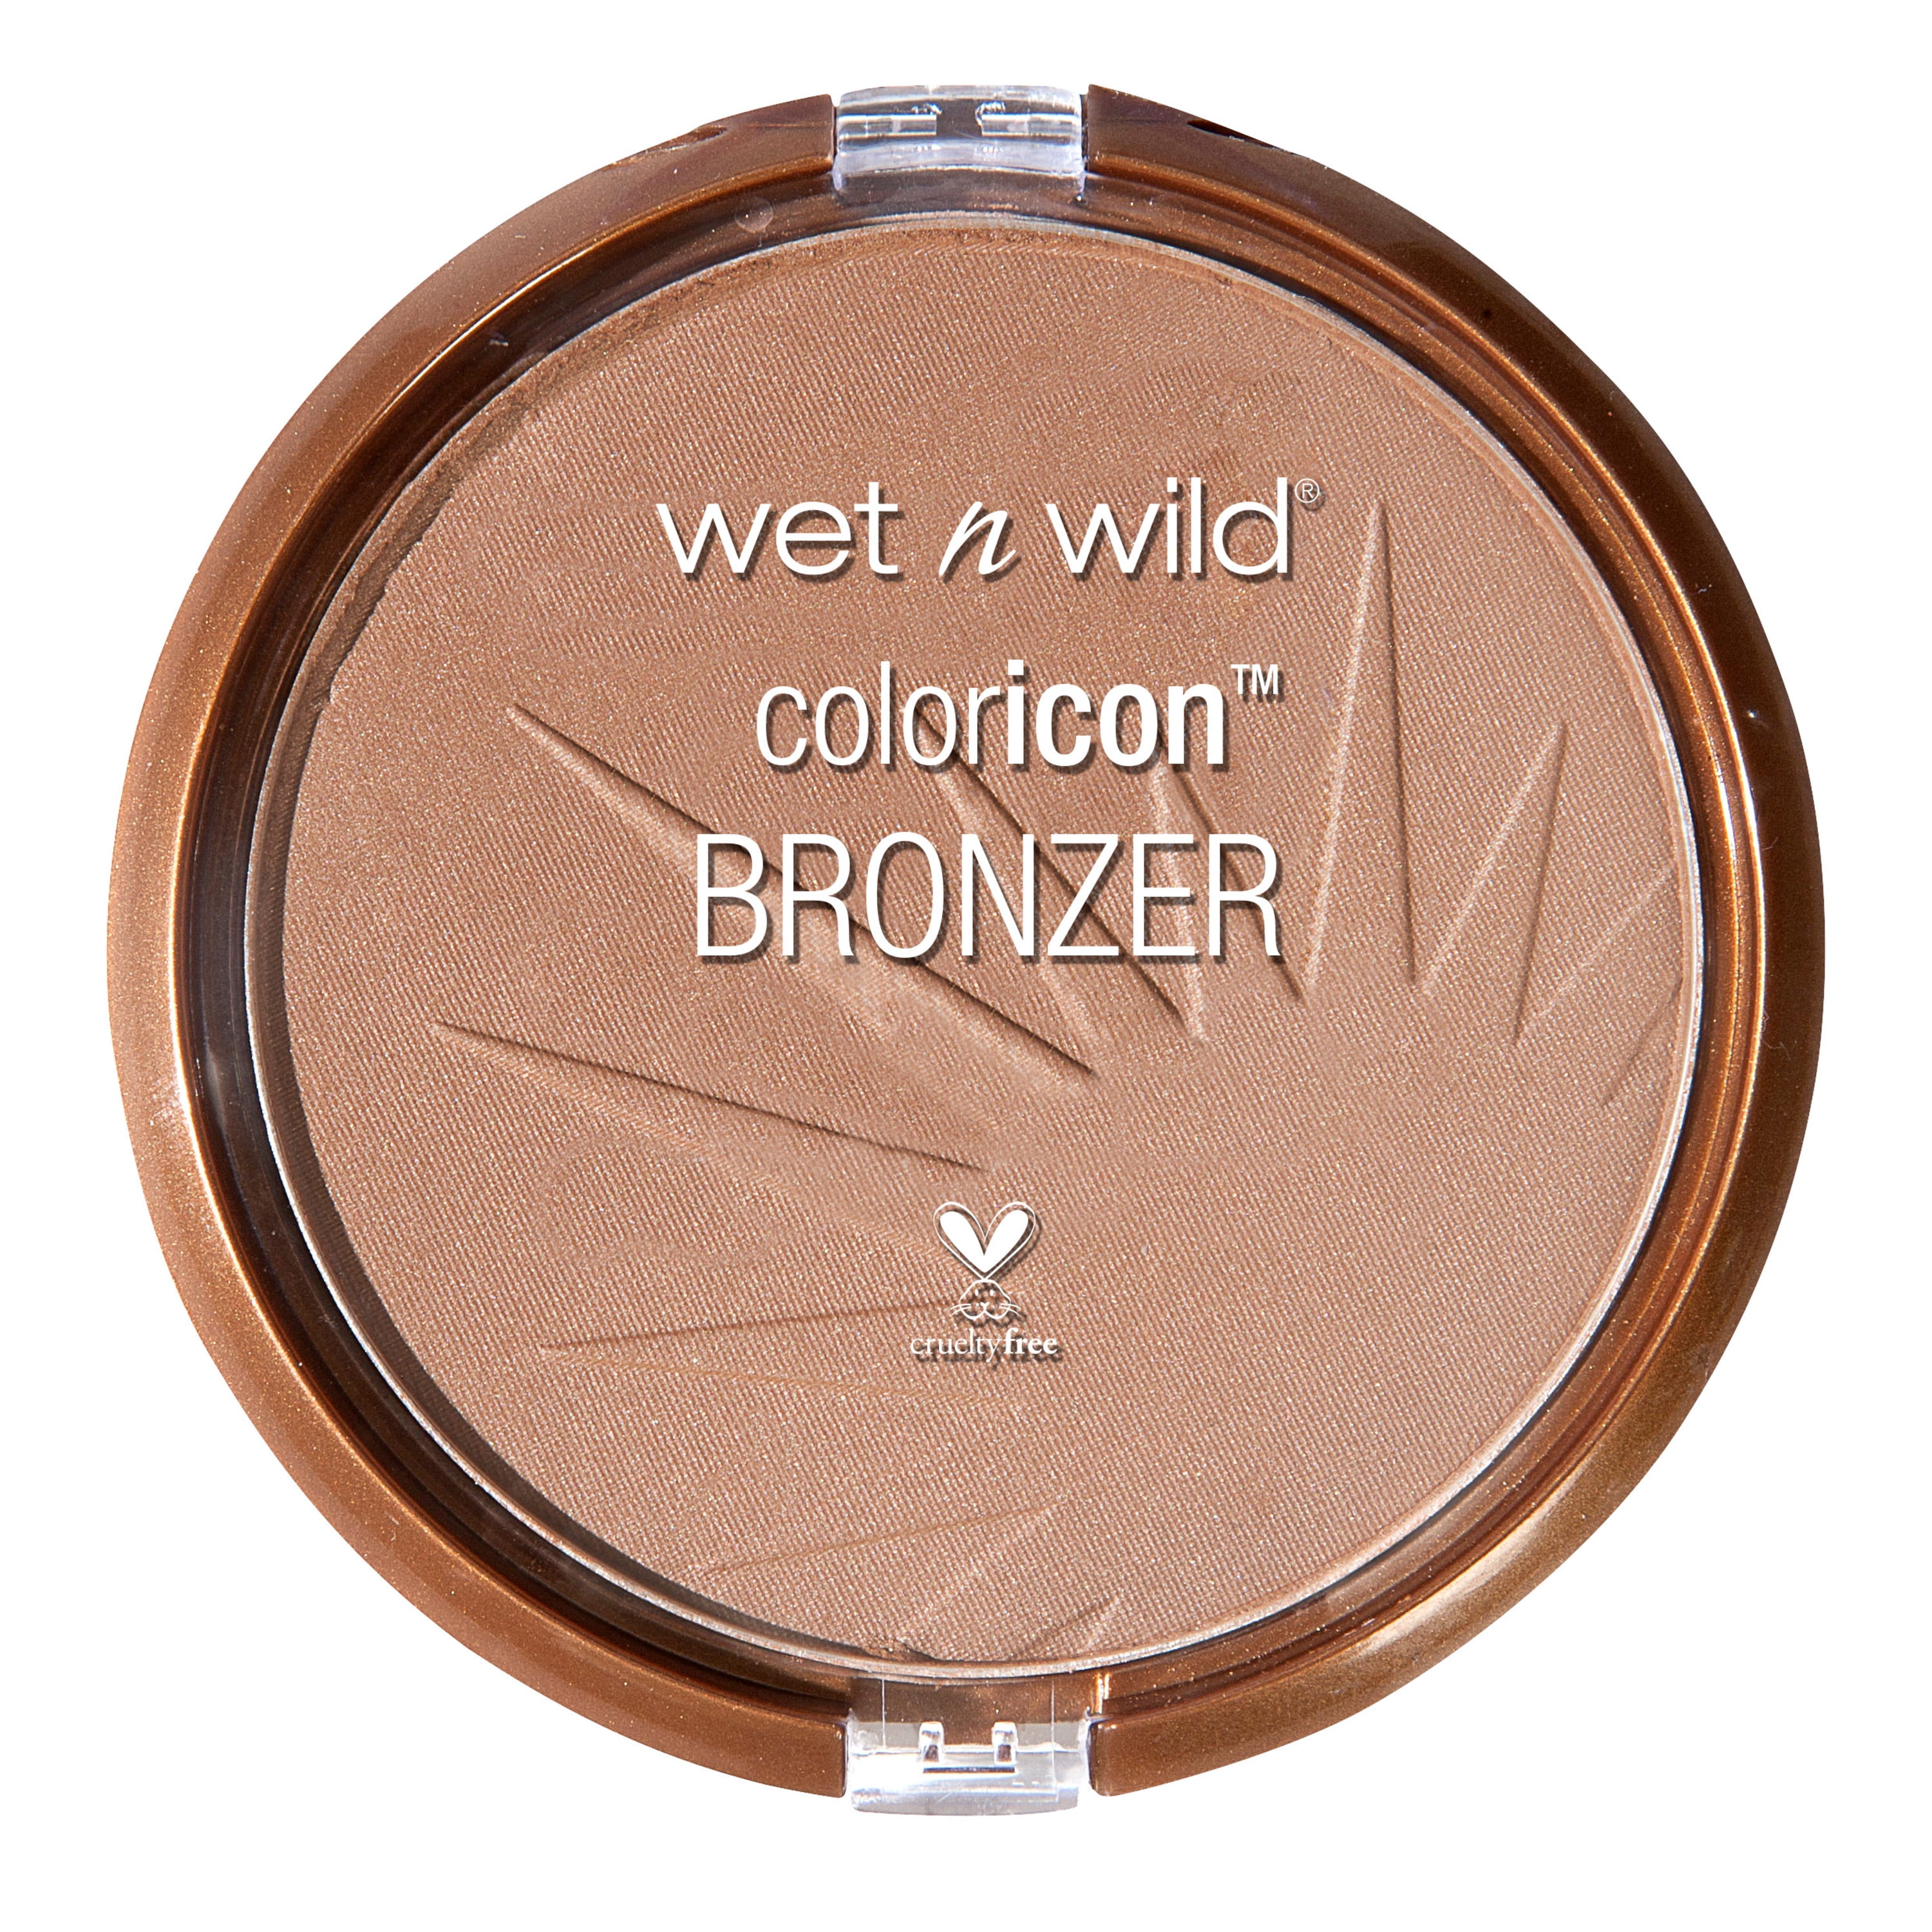 wet n wild Color Icon Bronzer, Ticket to Brazil pic